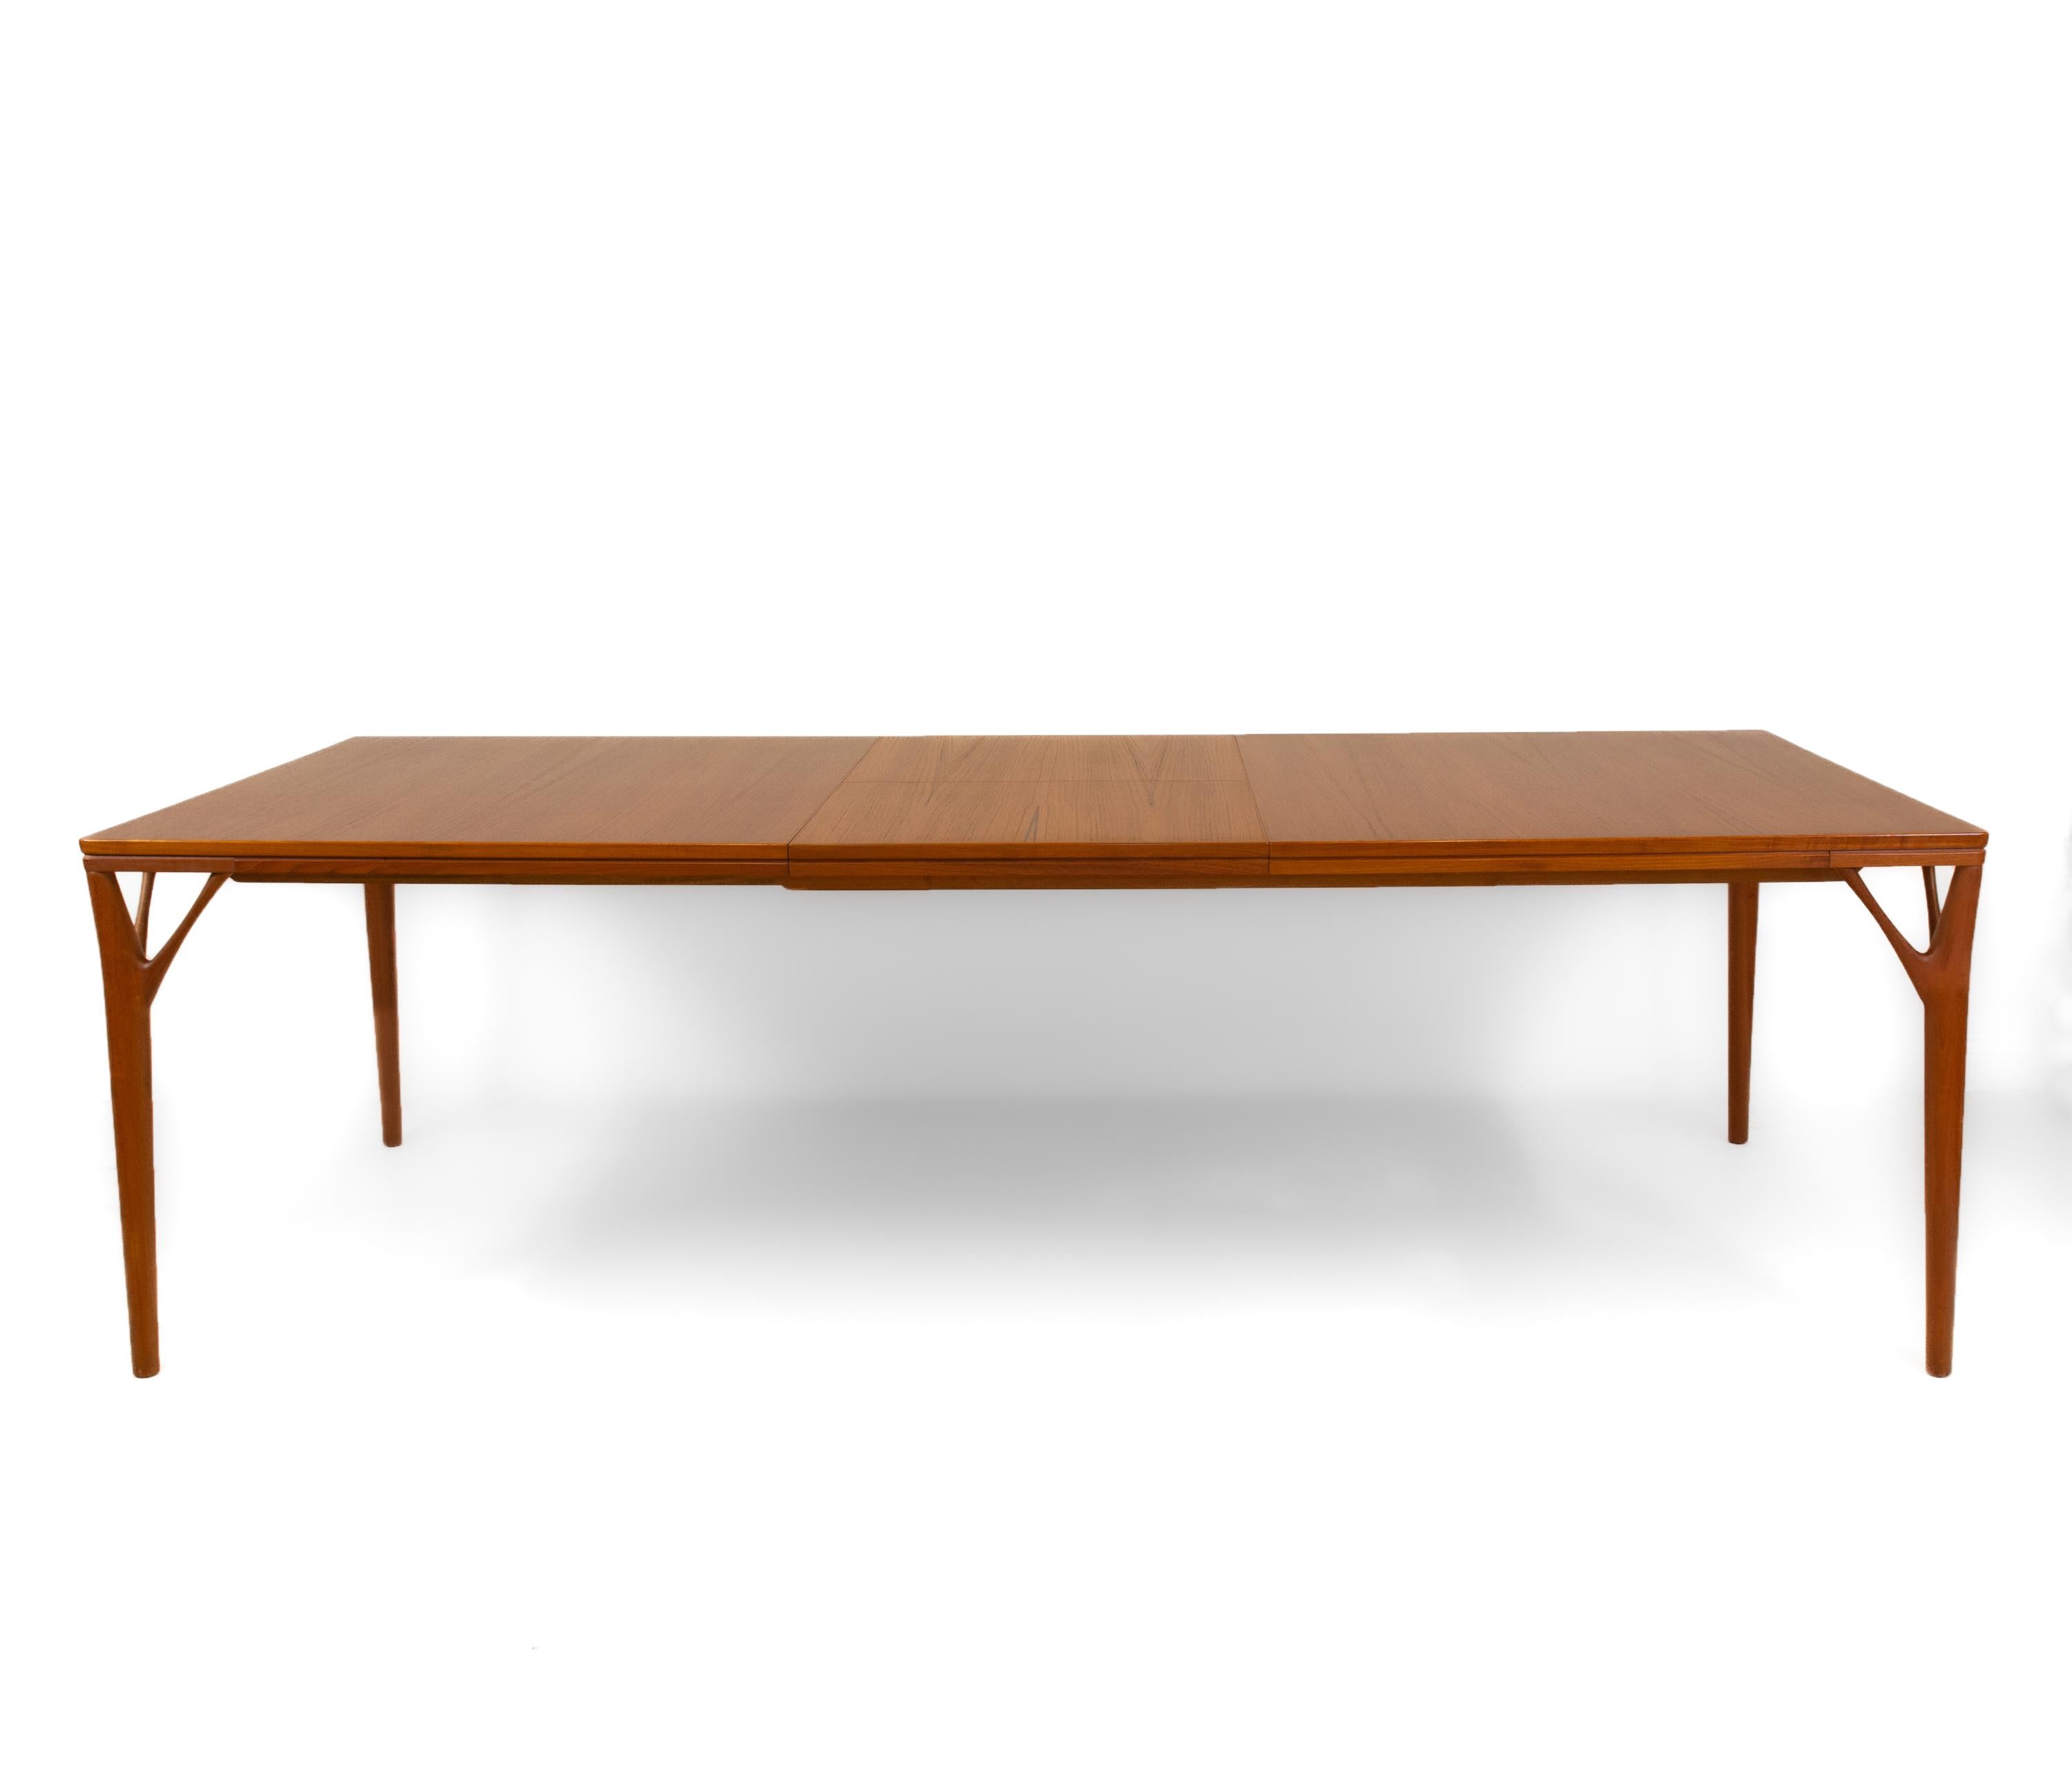 A beautiful mid century Danish ‘Tree Leg’ teak extending dining table by H Sigh & Sons. Maker's label, 'H. Sign & Sons Denmark'. Signed in pencil 'Table No 35'. Circa 1960.

Delivery is INCLUDED in the price for all areas in MAINLAND England &